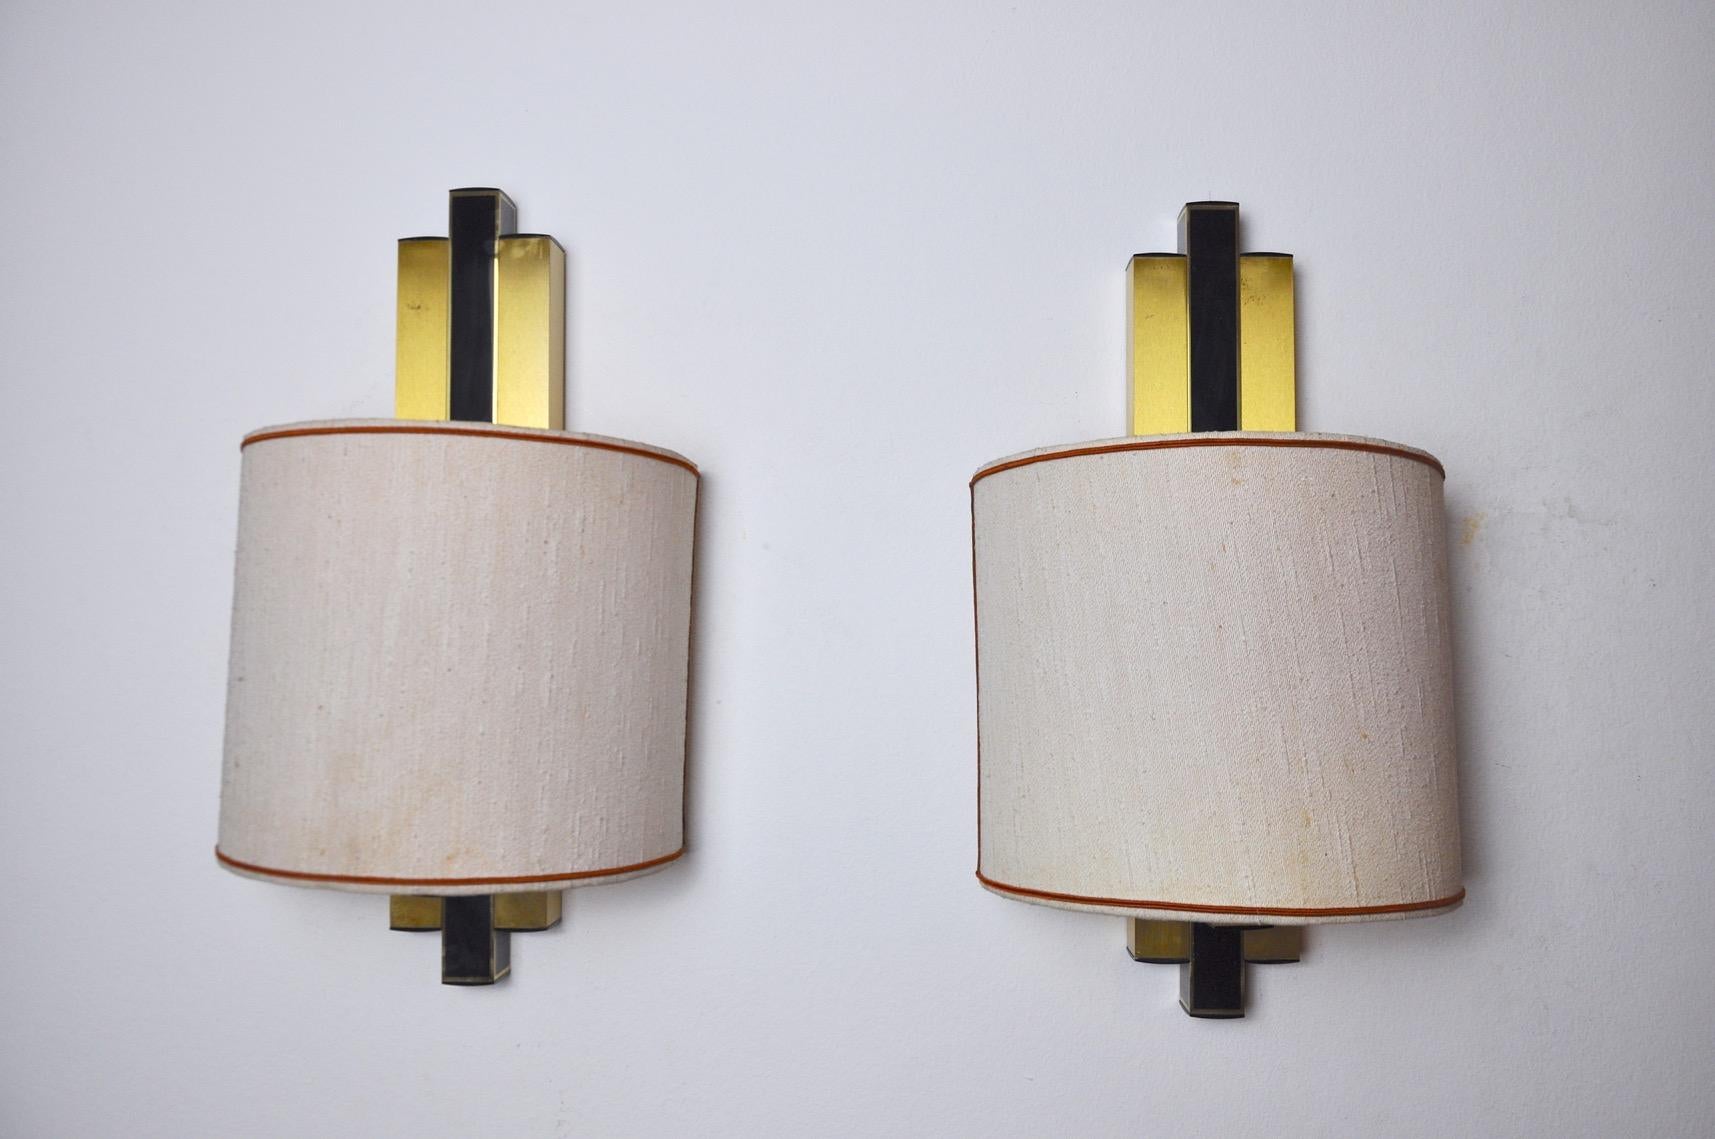 Superb and rare pair of lumica wall lights, design attributed to willy rizzo, produced in spain in the 1970s. Unique object that will illuminate wonderfully and bring a real design touch to your interior. Electricity checked, mark of time in